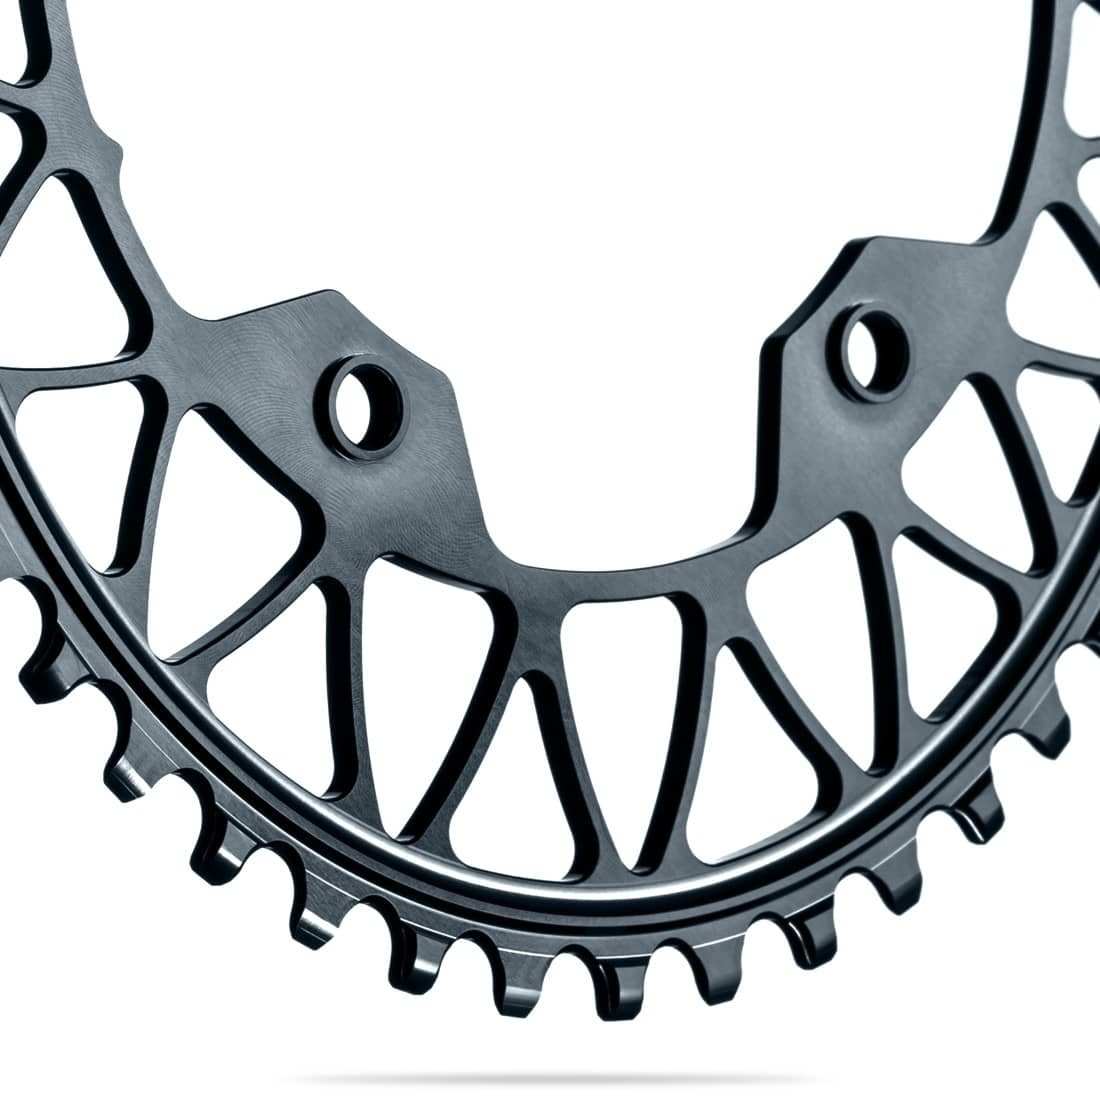 GRAVEL 1X OVAL 110/5 BCD N/W TRACTION CHAINRING